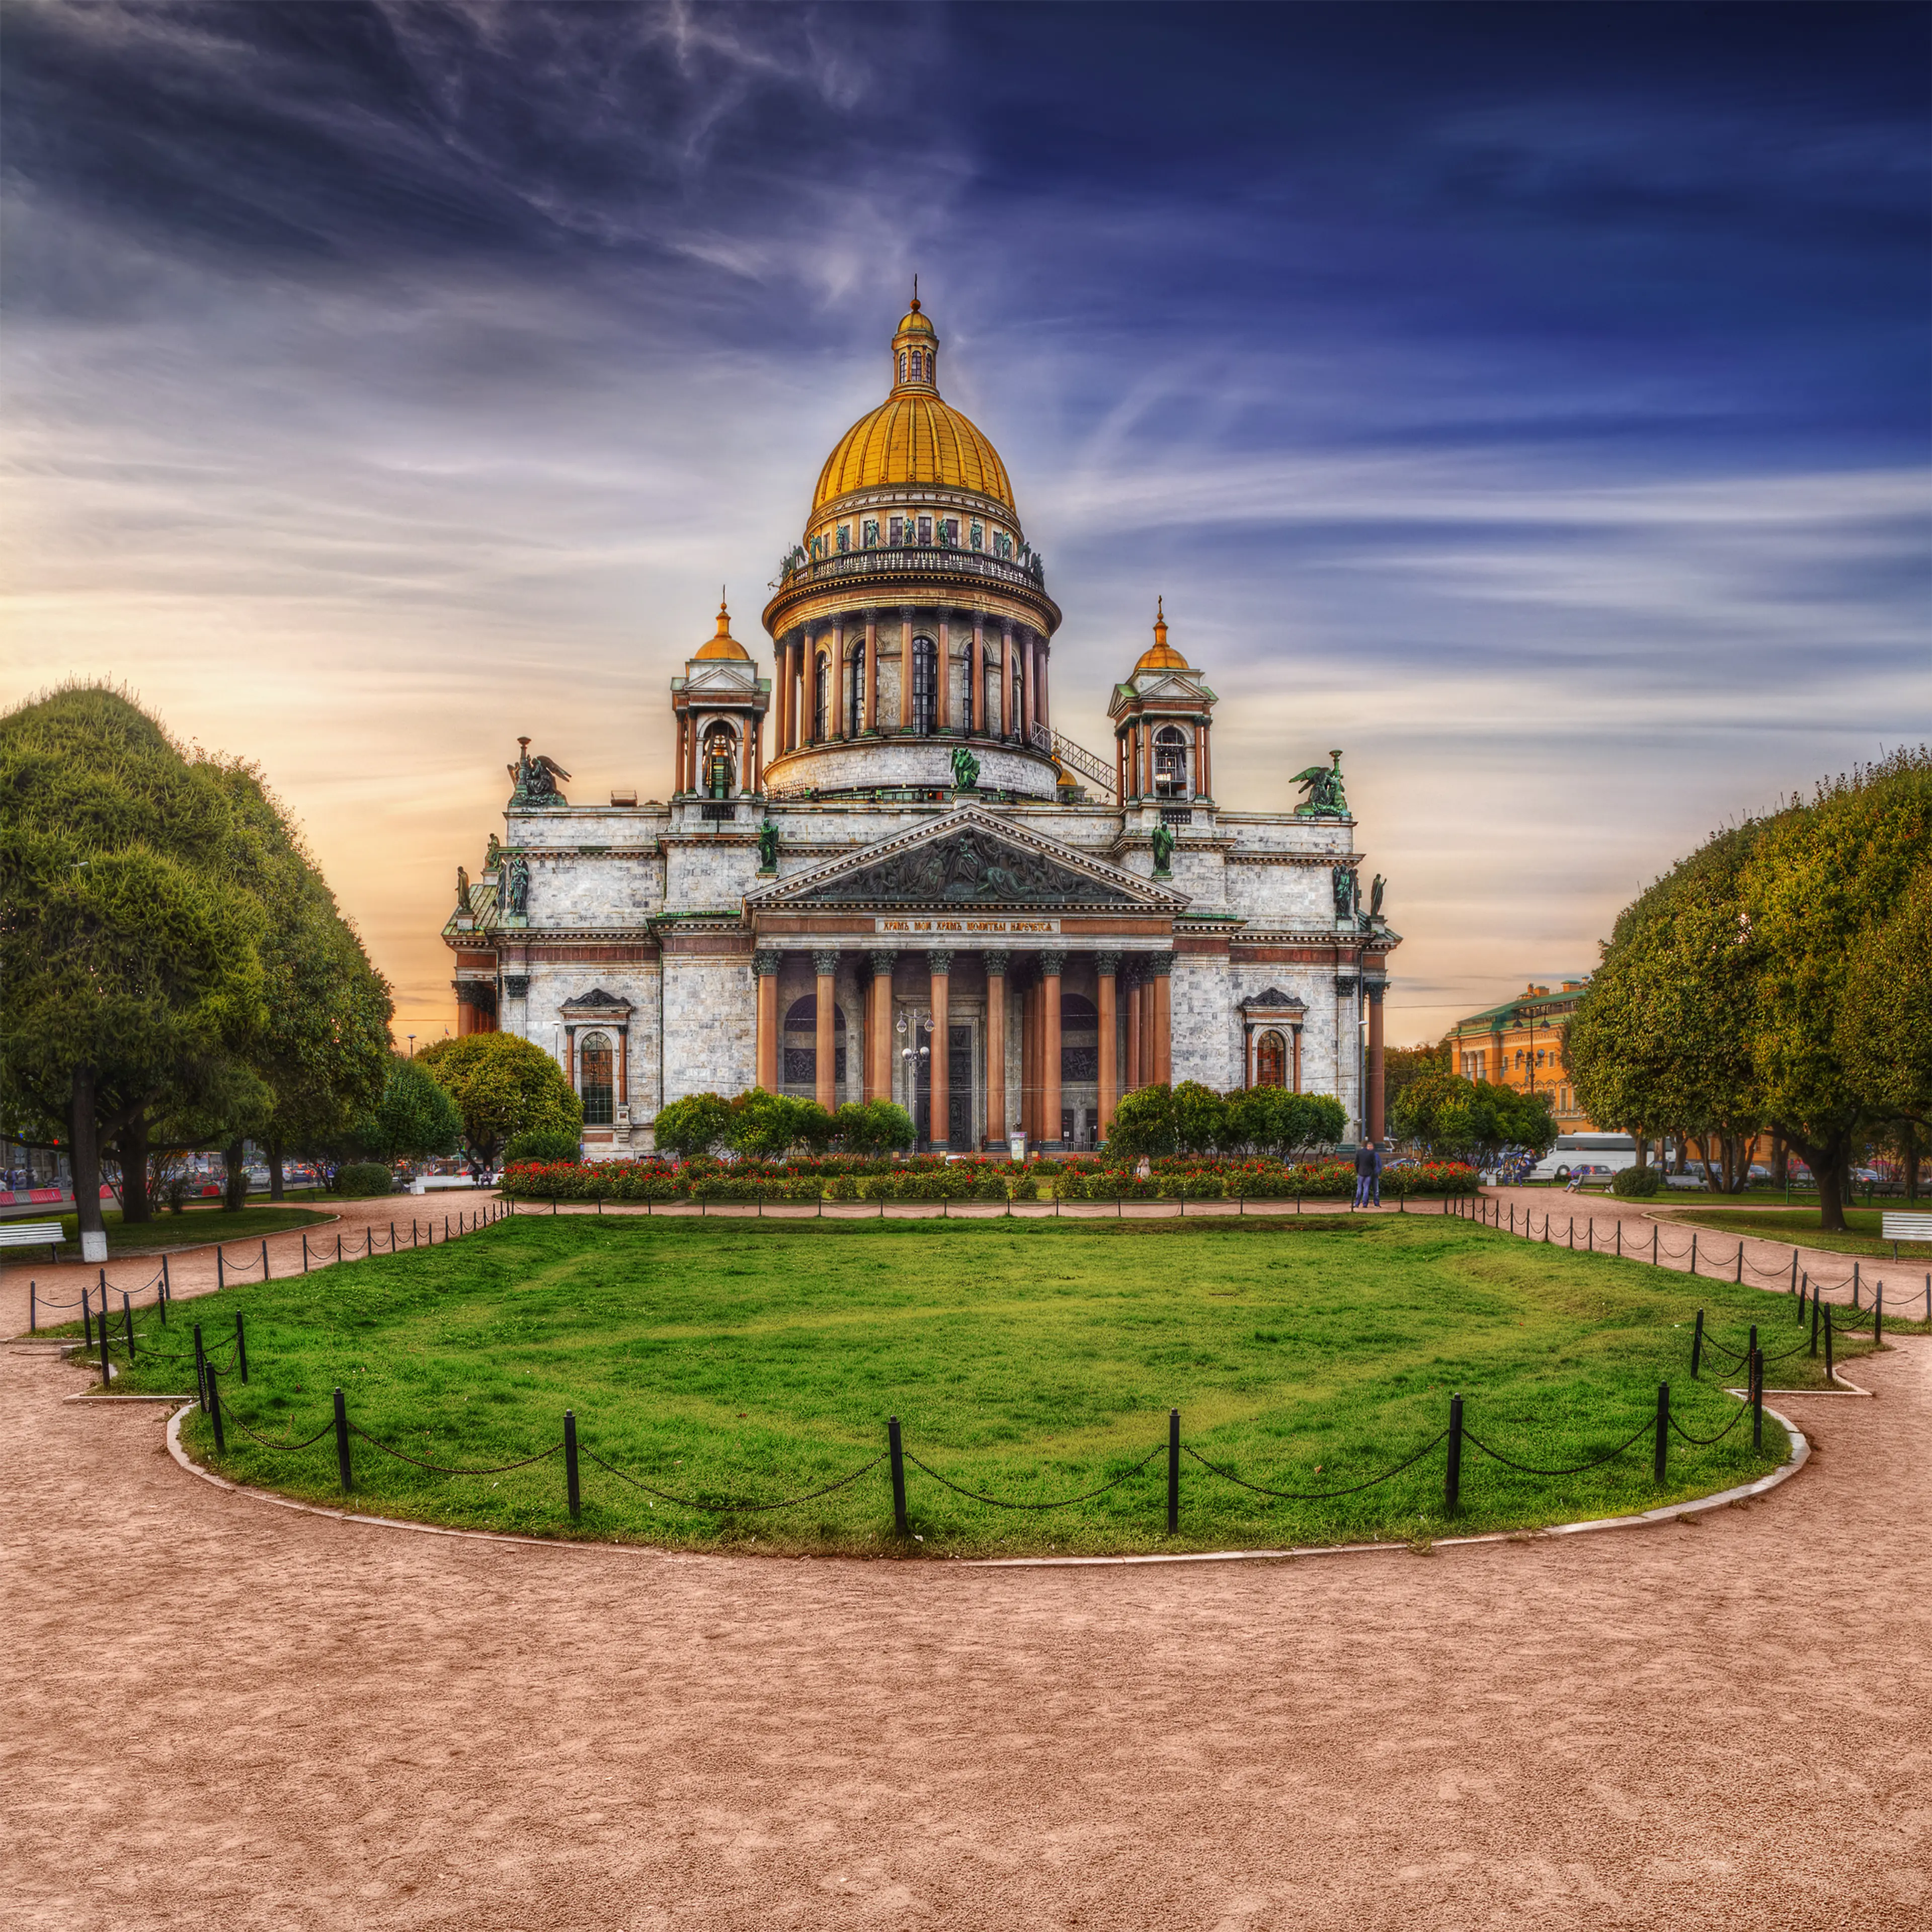 1-Day Saint Petersburg Relaxation & Shopping Itinerary with Friends